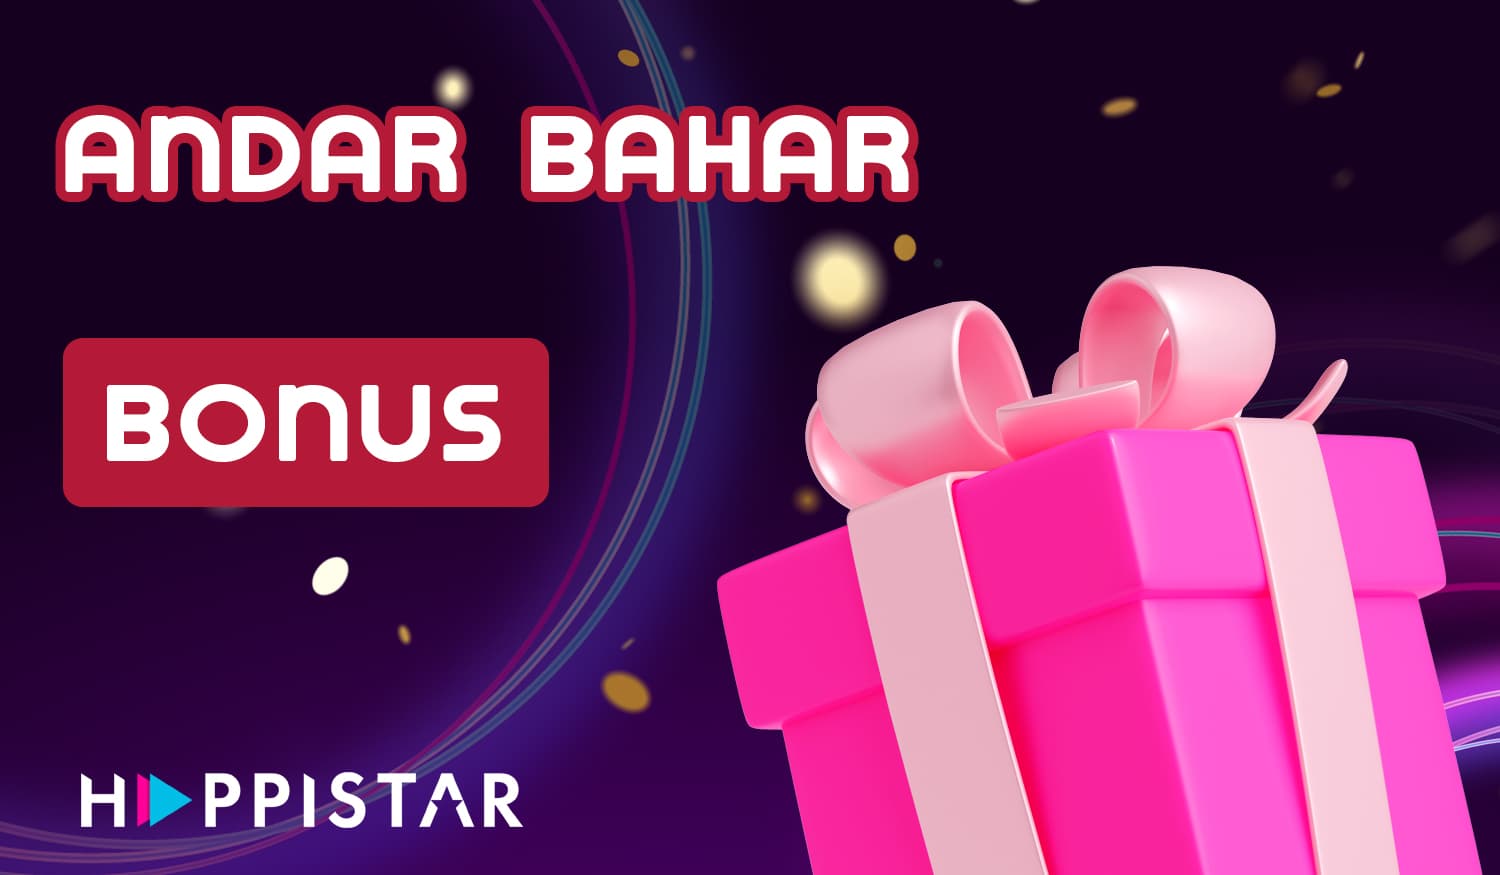 List of bonuses available at Happistar online casino site for Andar Bahar players